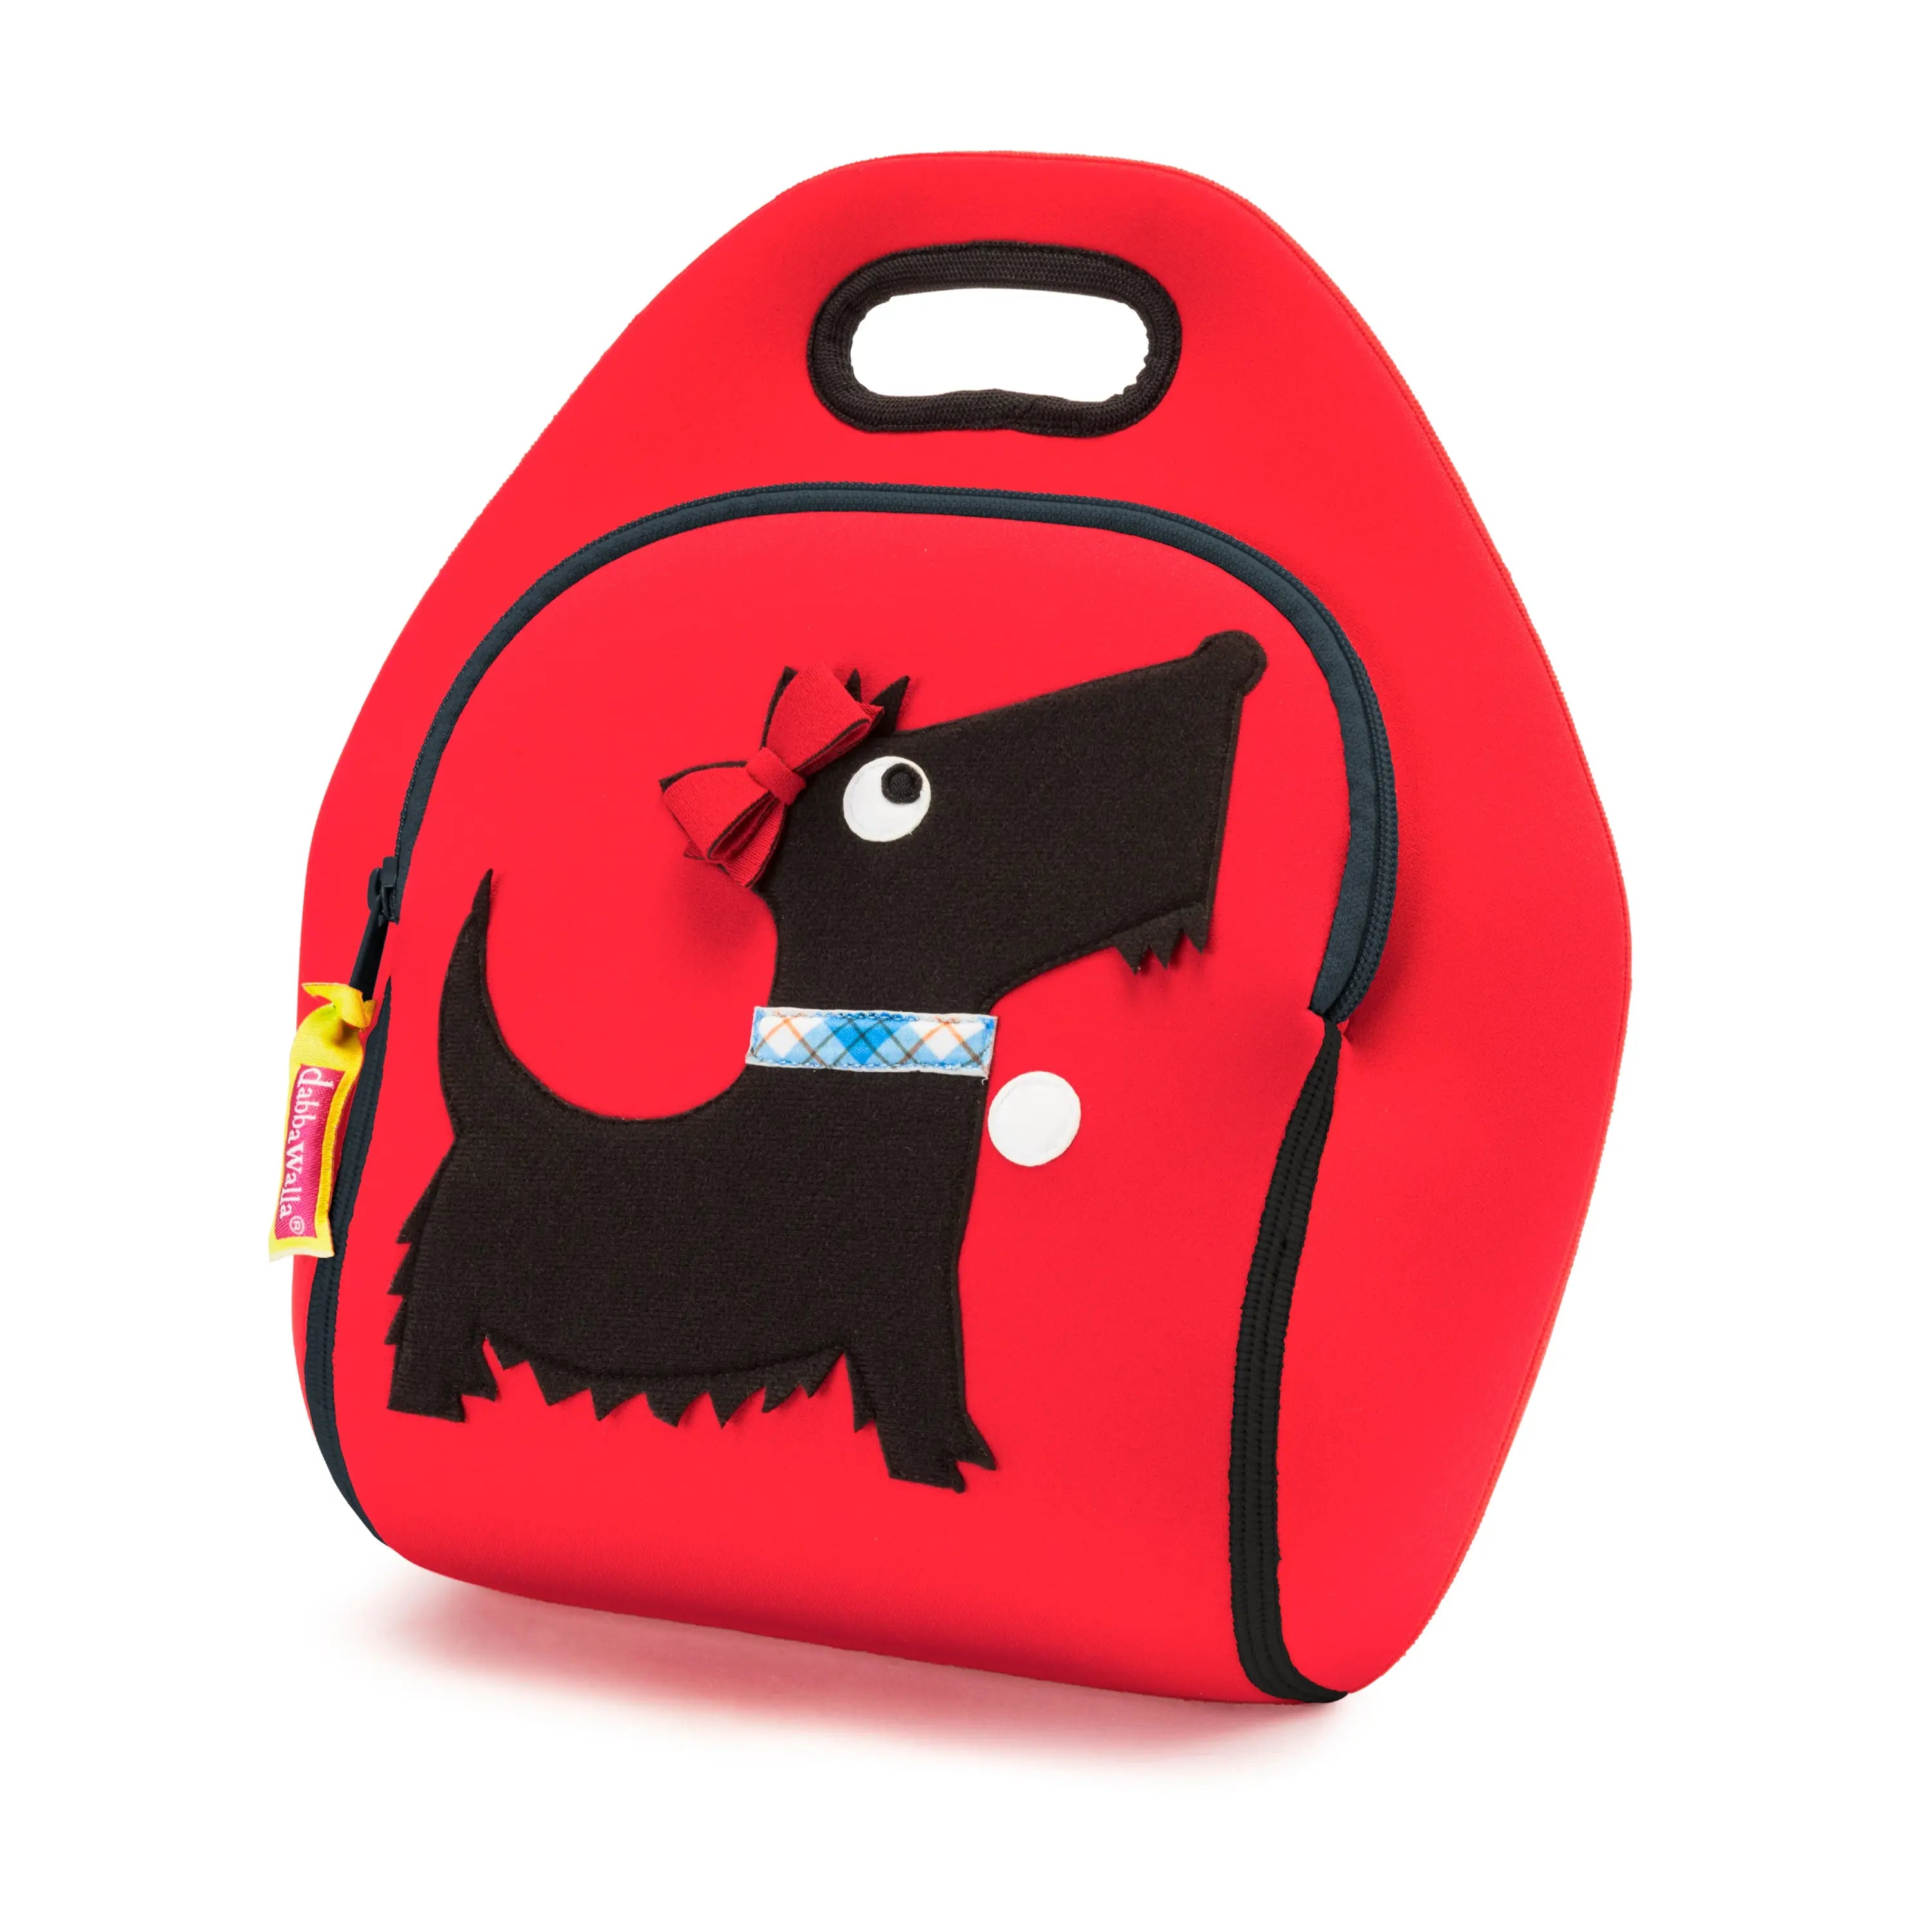 Scottie Dog Lunch Bag - Red and Black,Safety Harness, Kids Backpack Lunch Bag Dabbawalla   